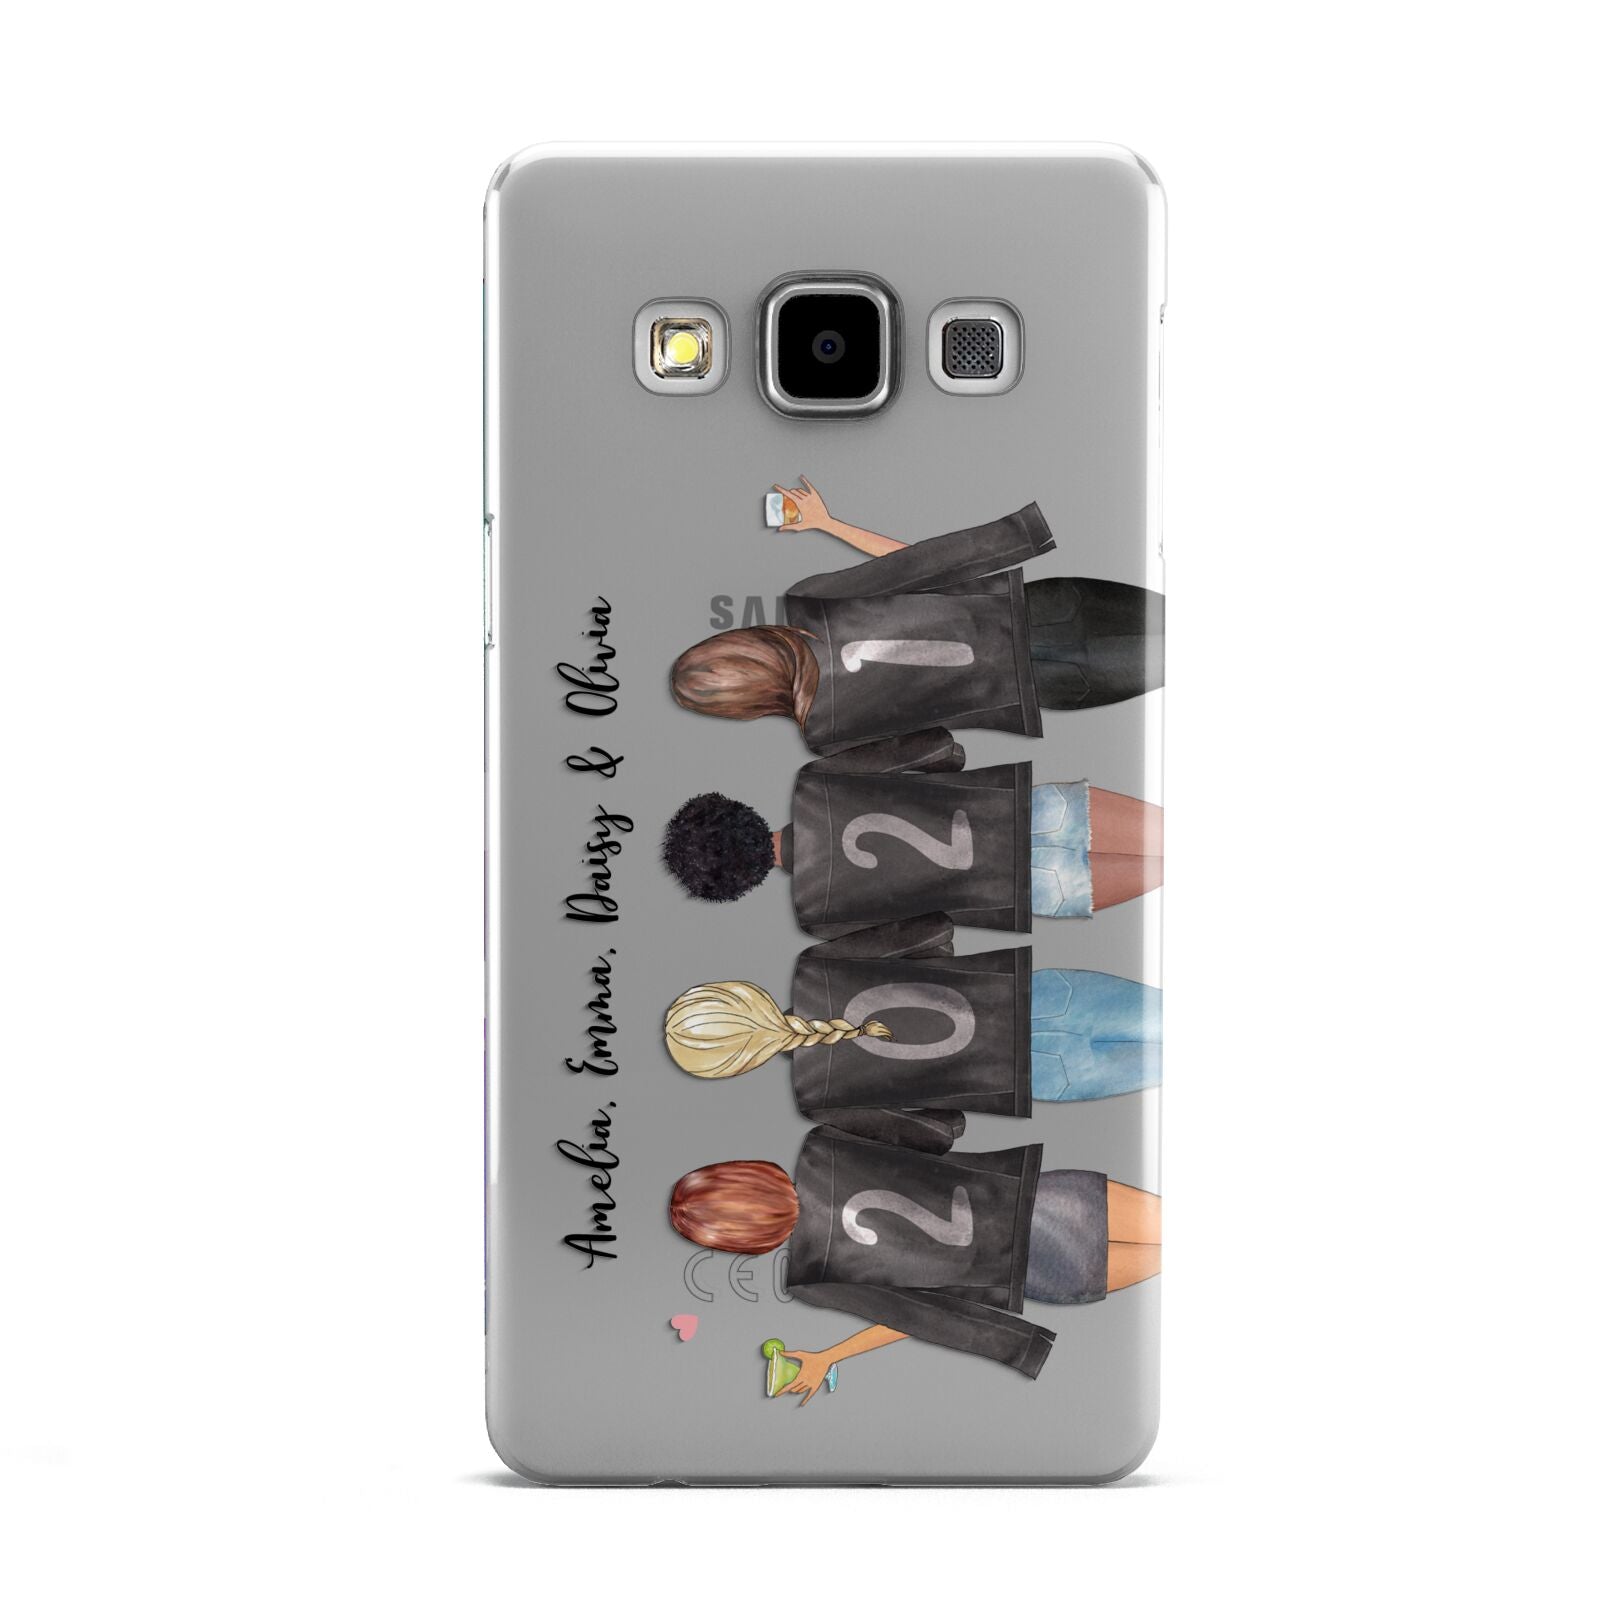 4 Best Friends with Names Samsung Galaxy A5 Case